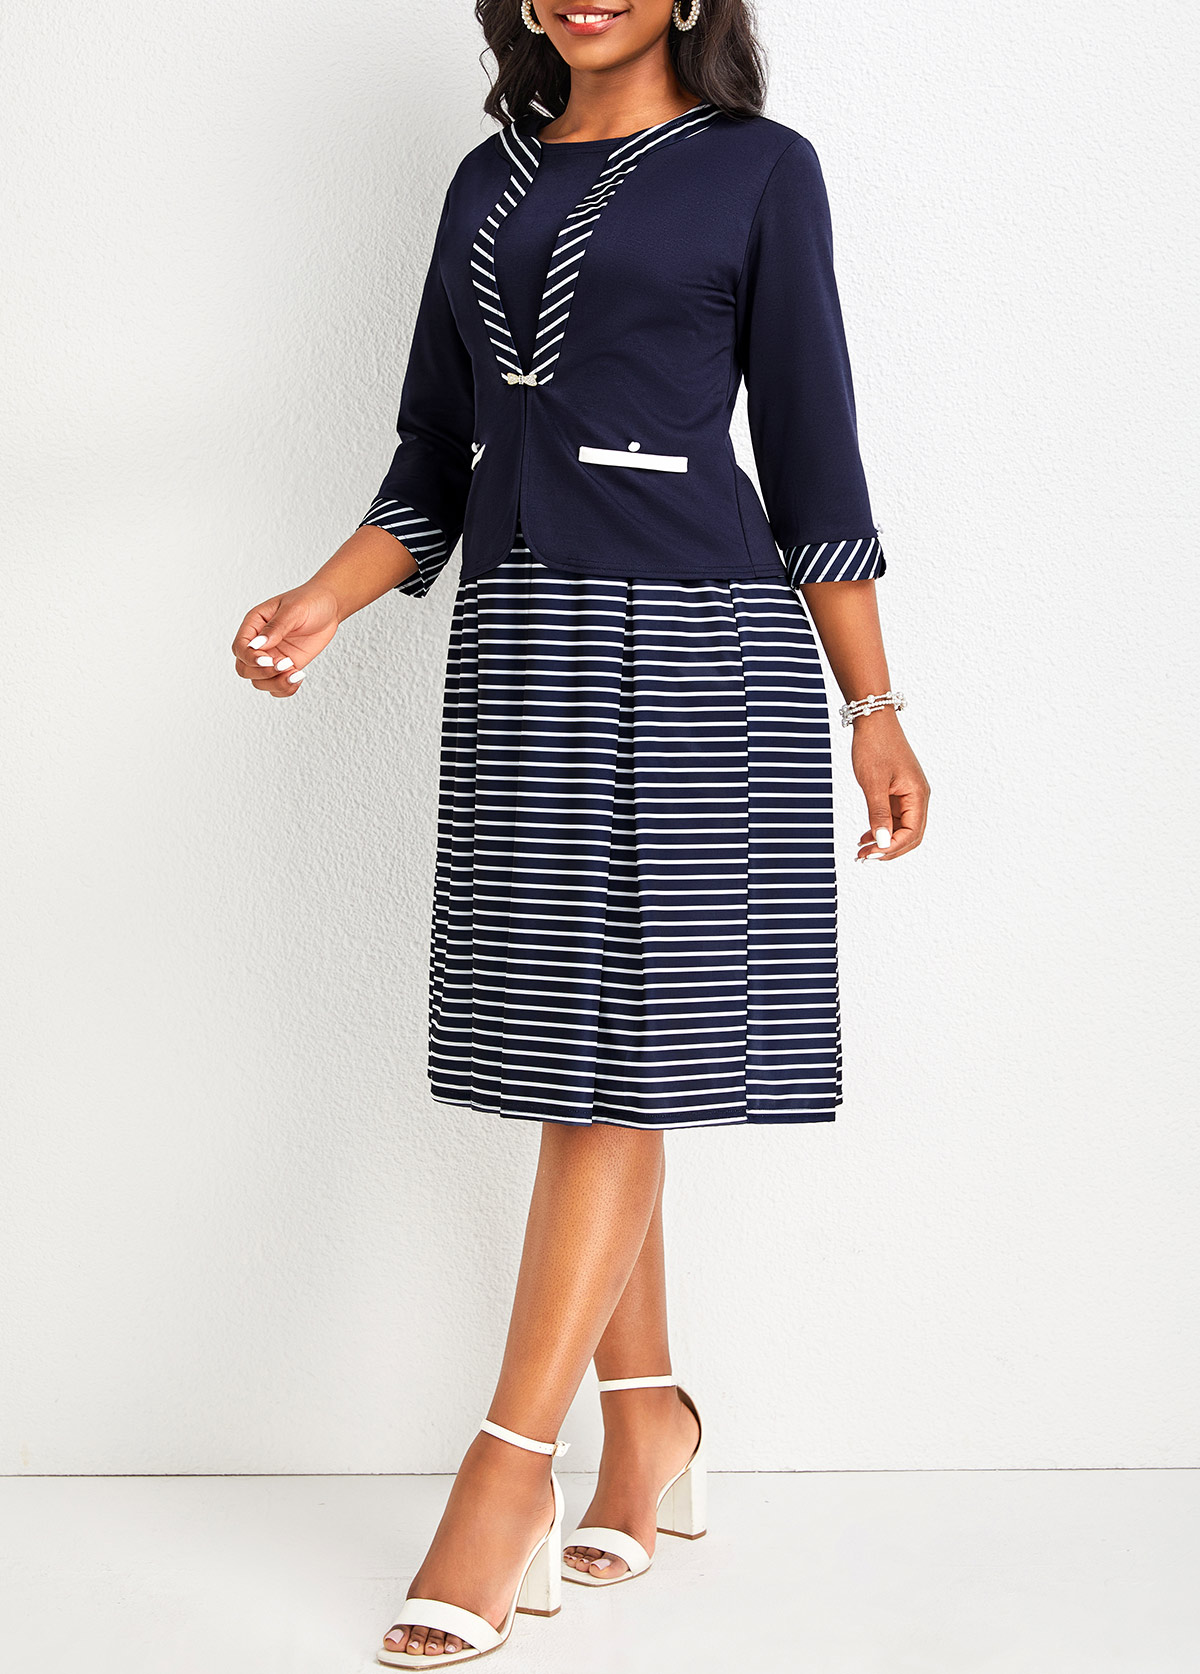 Patchwork Navy Striped Dress and Cardigan